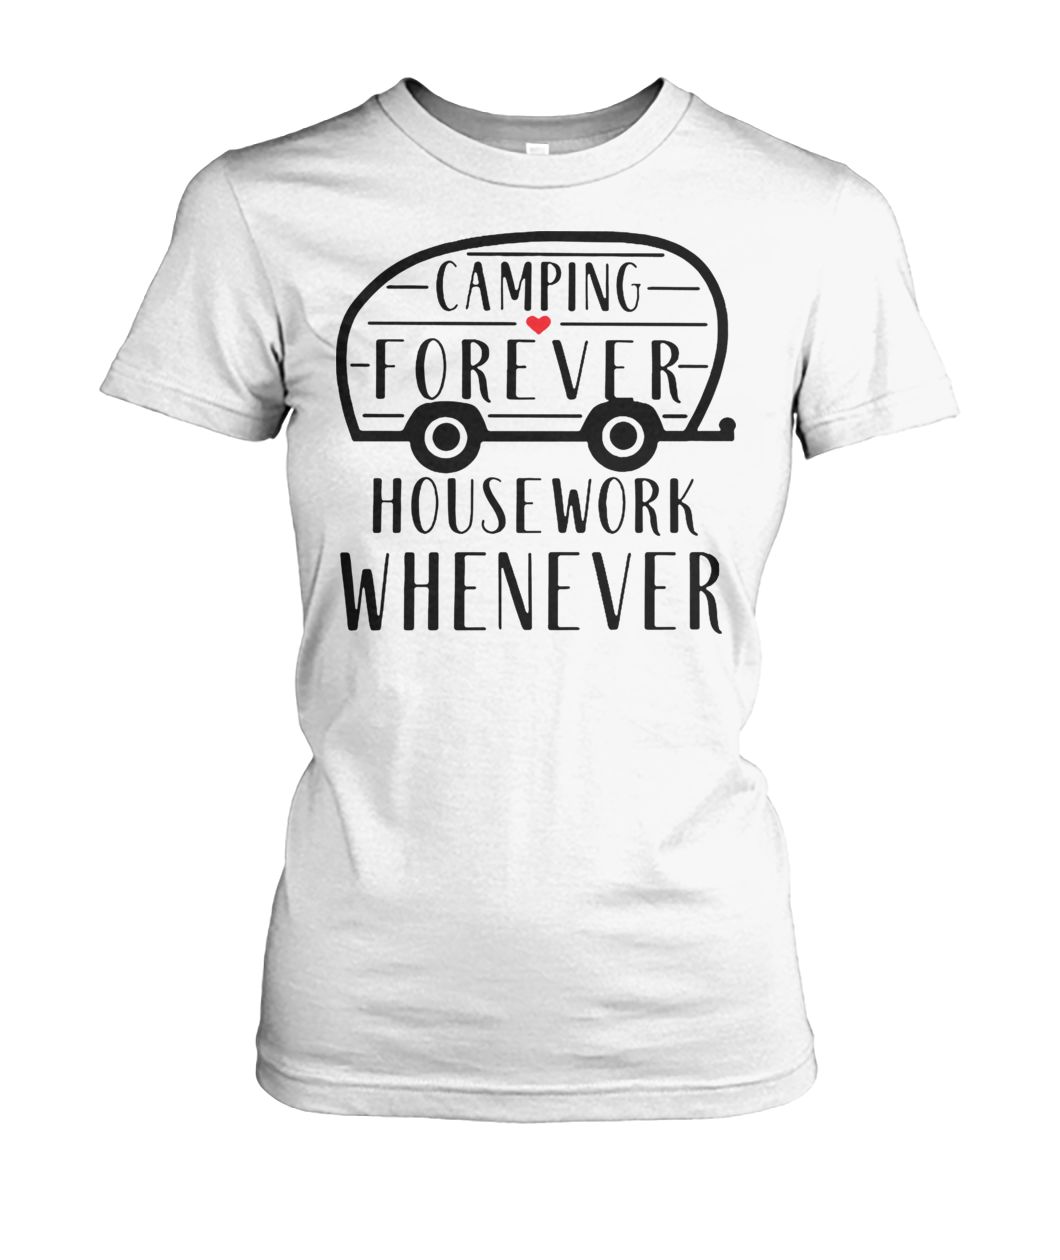 Camping forever housework whenever women's crew tee